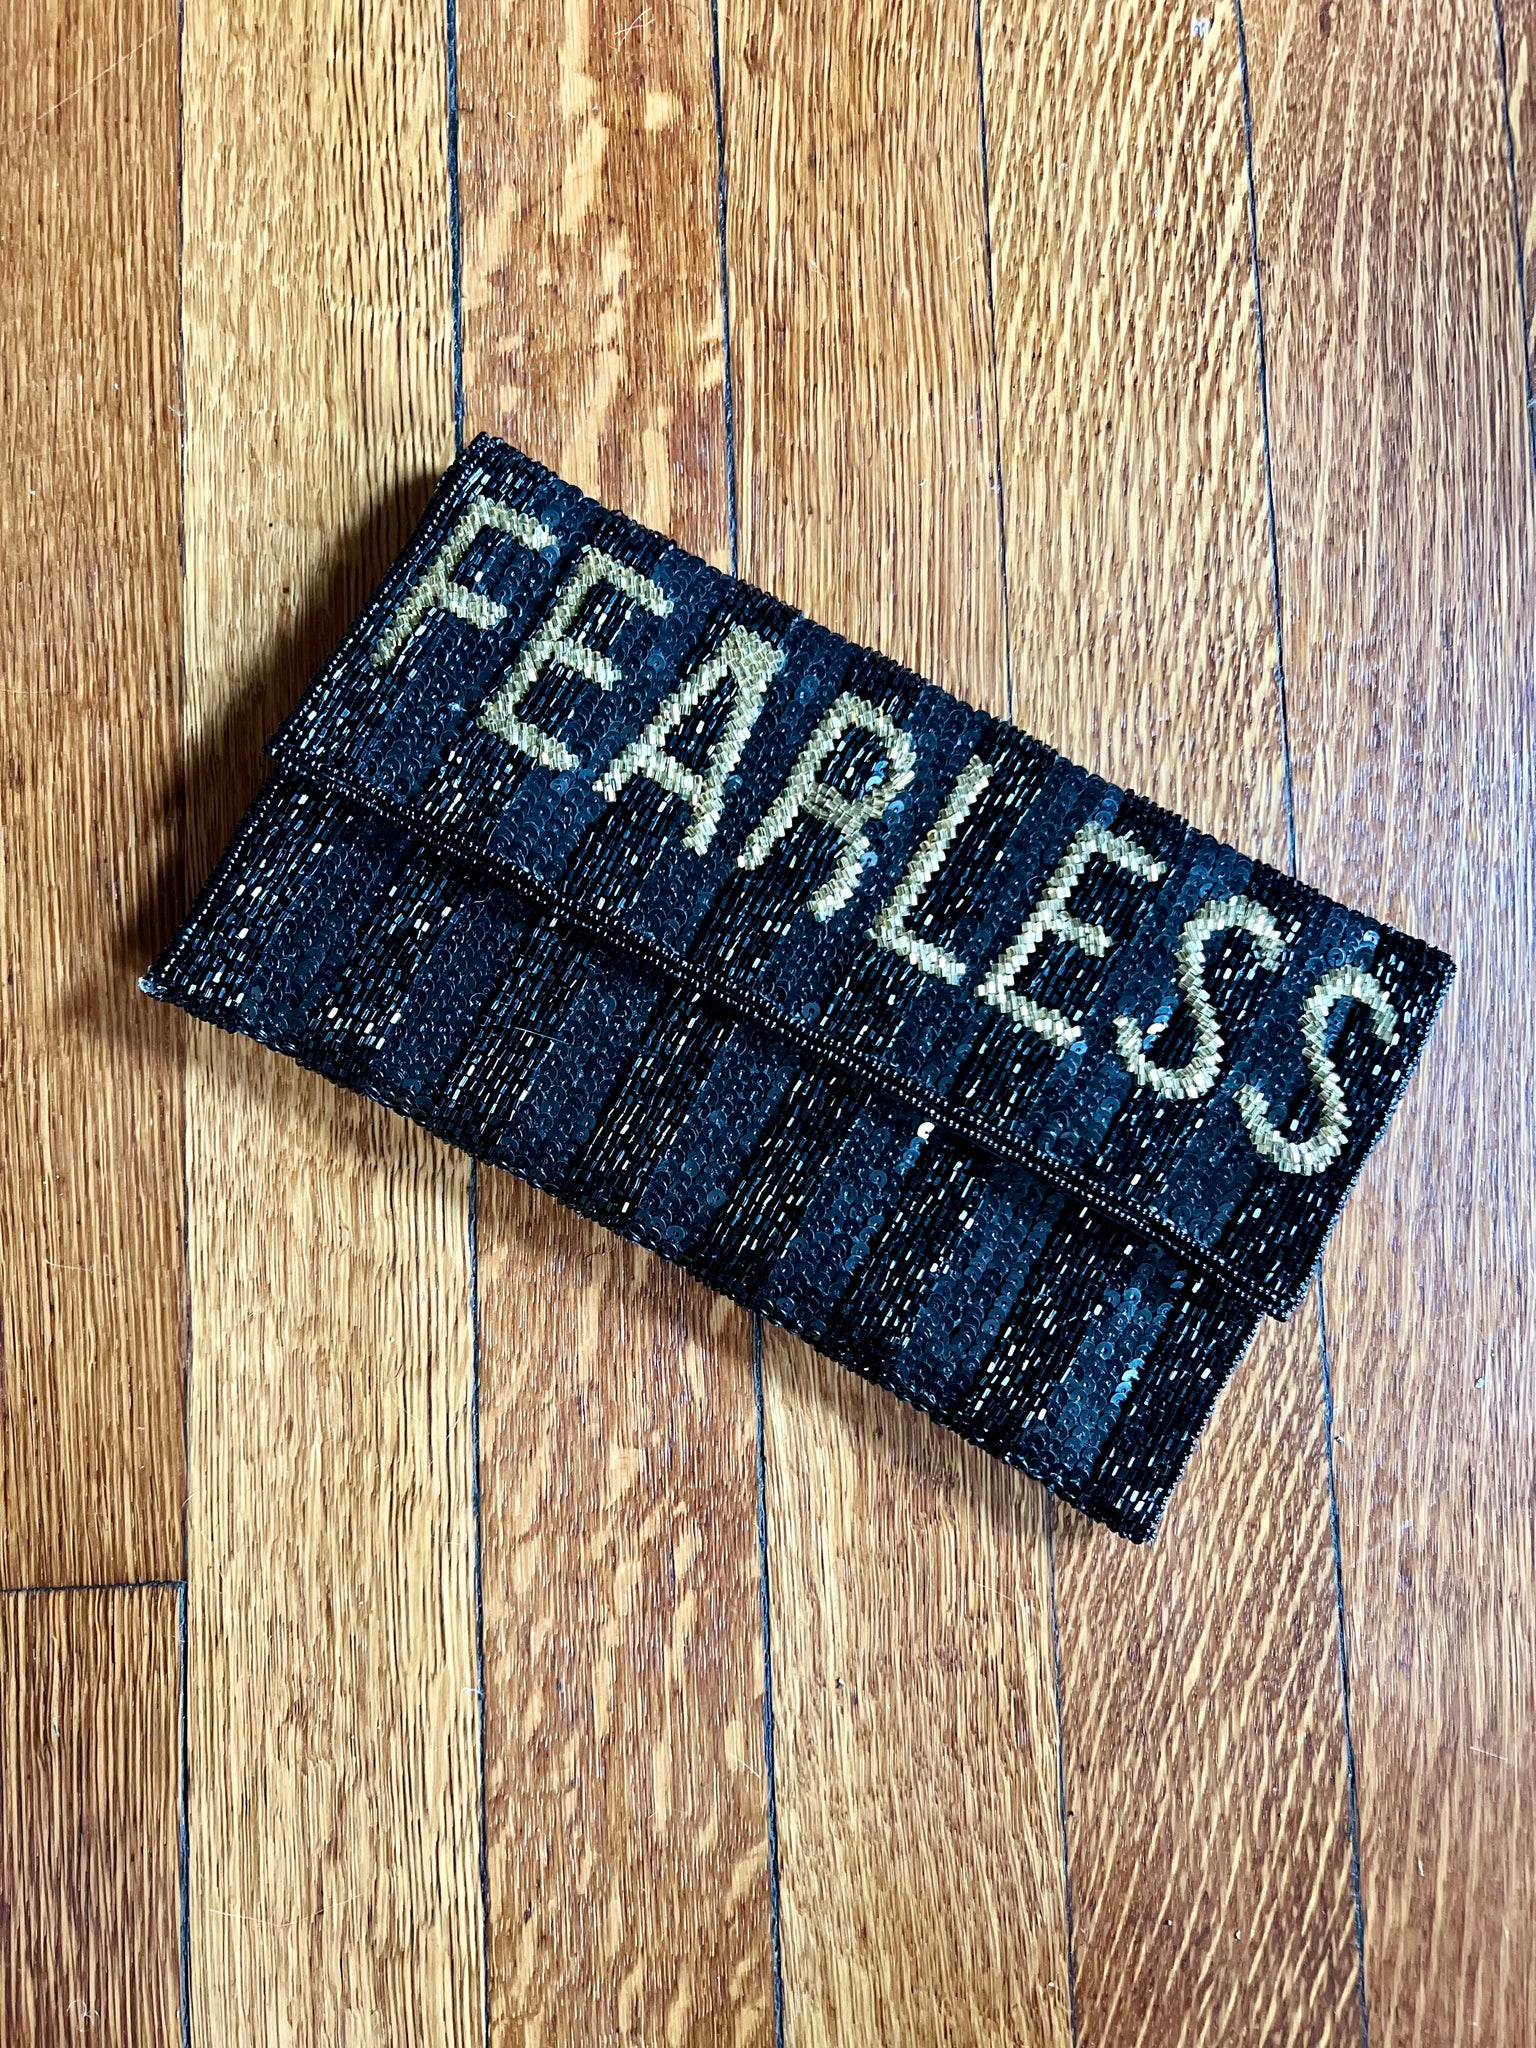 Statement Beaded Envelope Clutch - Fearless